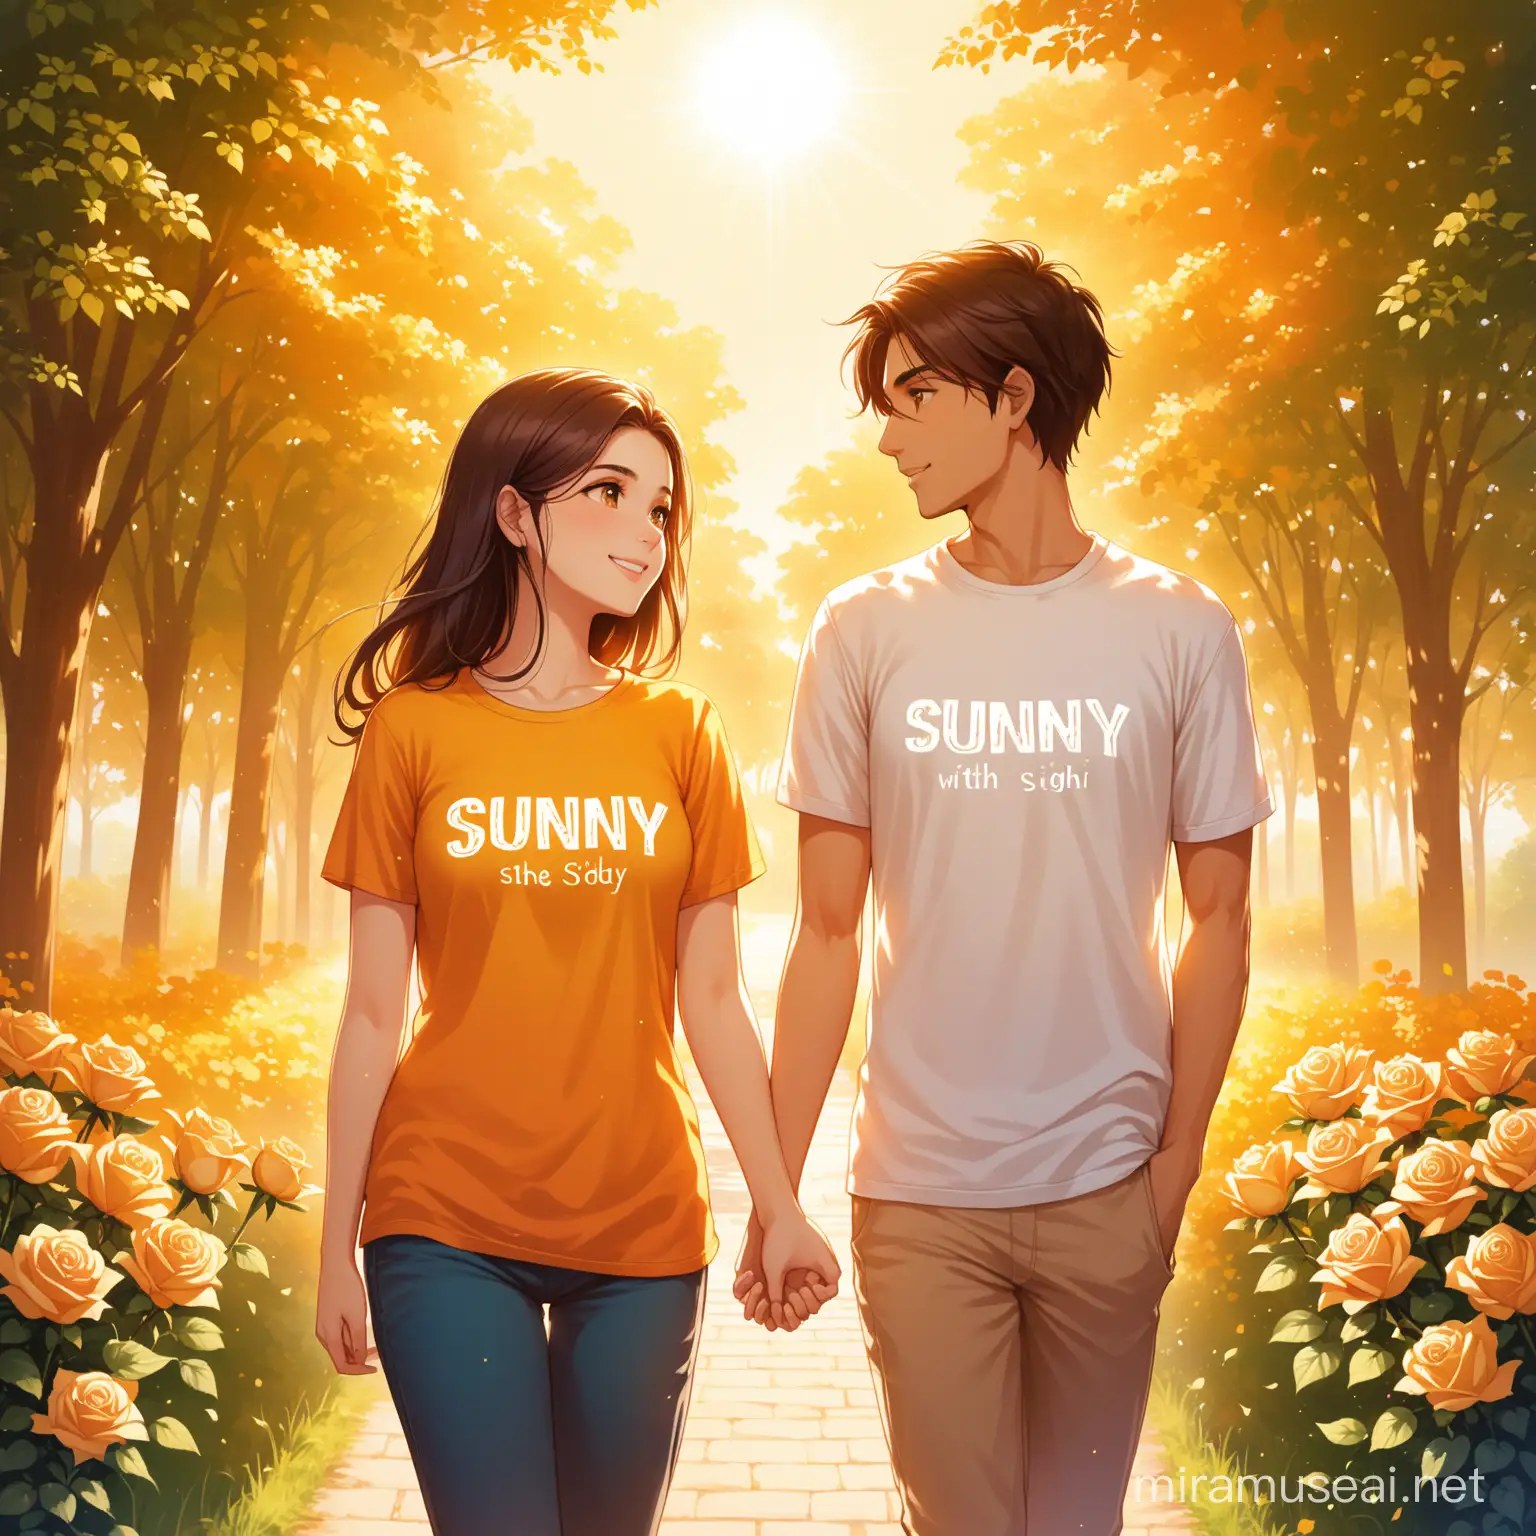 Two People Enjoying a Sunny Day in Vibrant TShirts